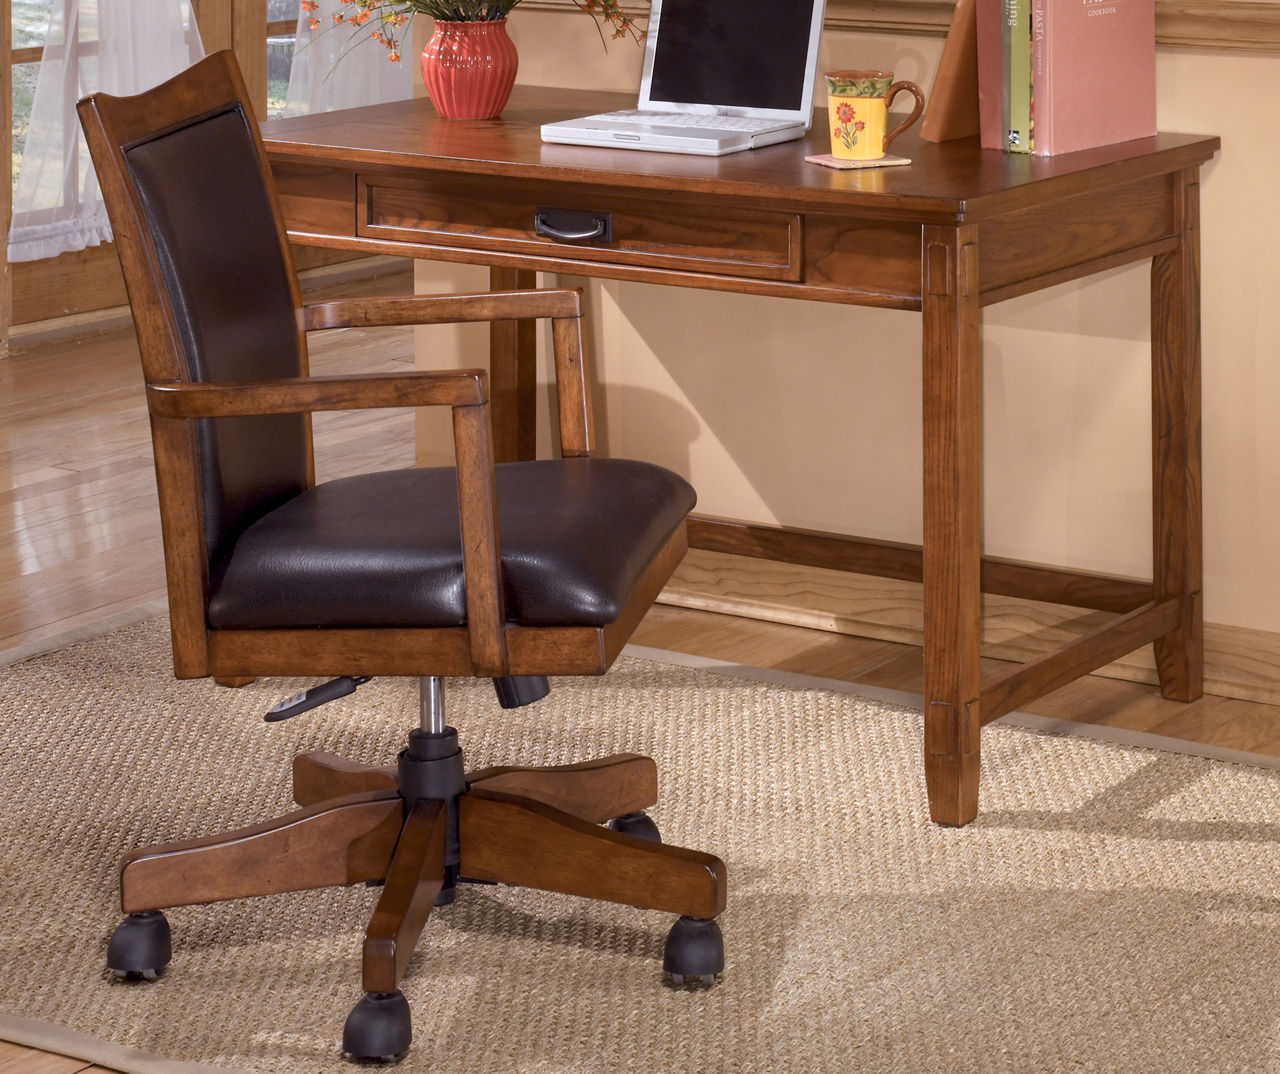 Buy Writing Desk for Home Office Small Desk With Drawer Oak Mid